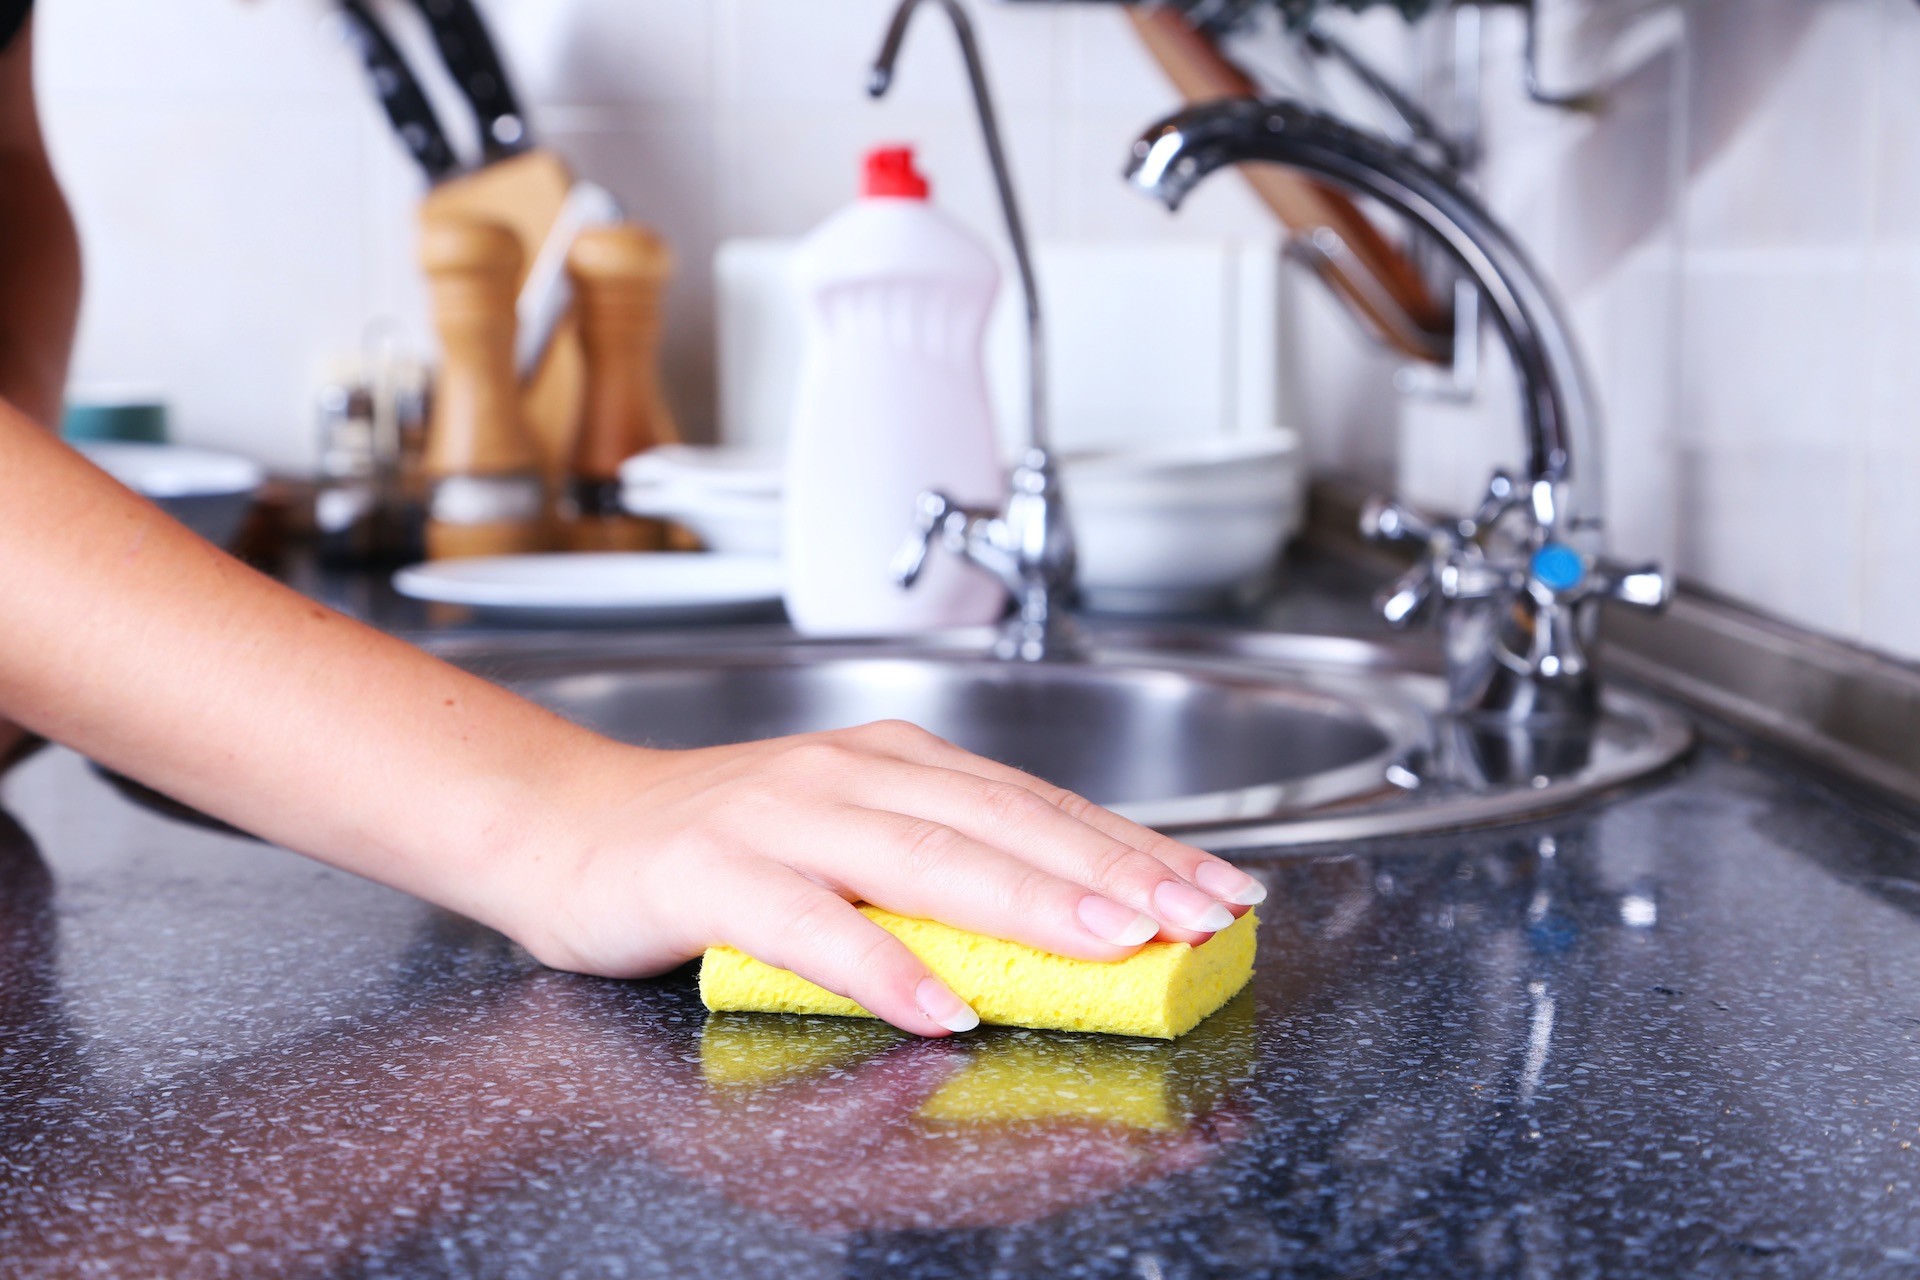 How To Clean Your Kitchen